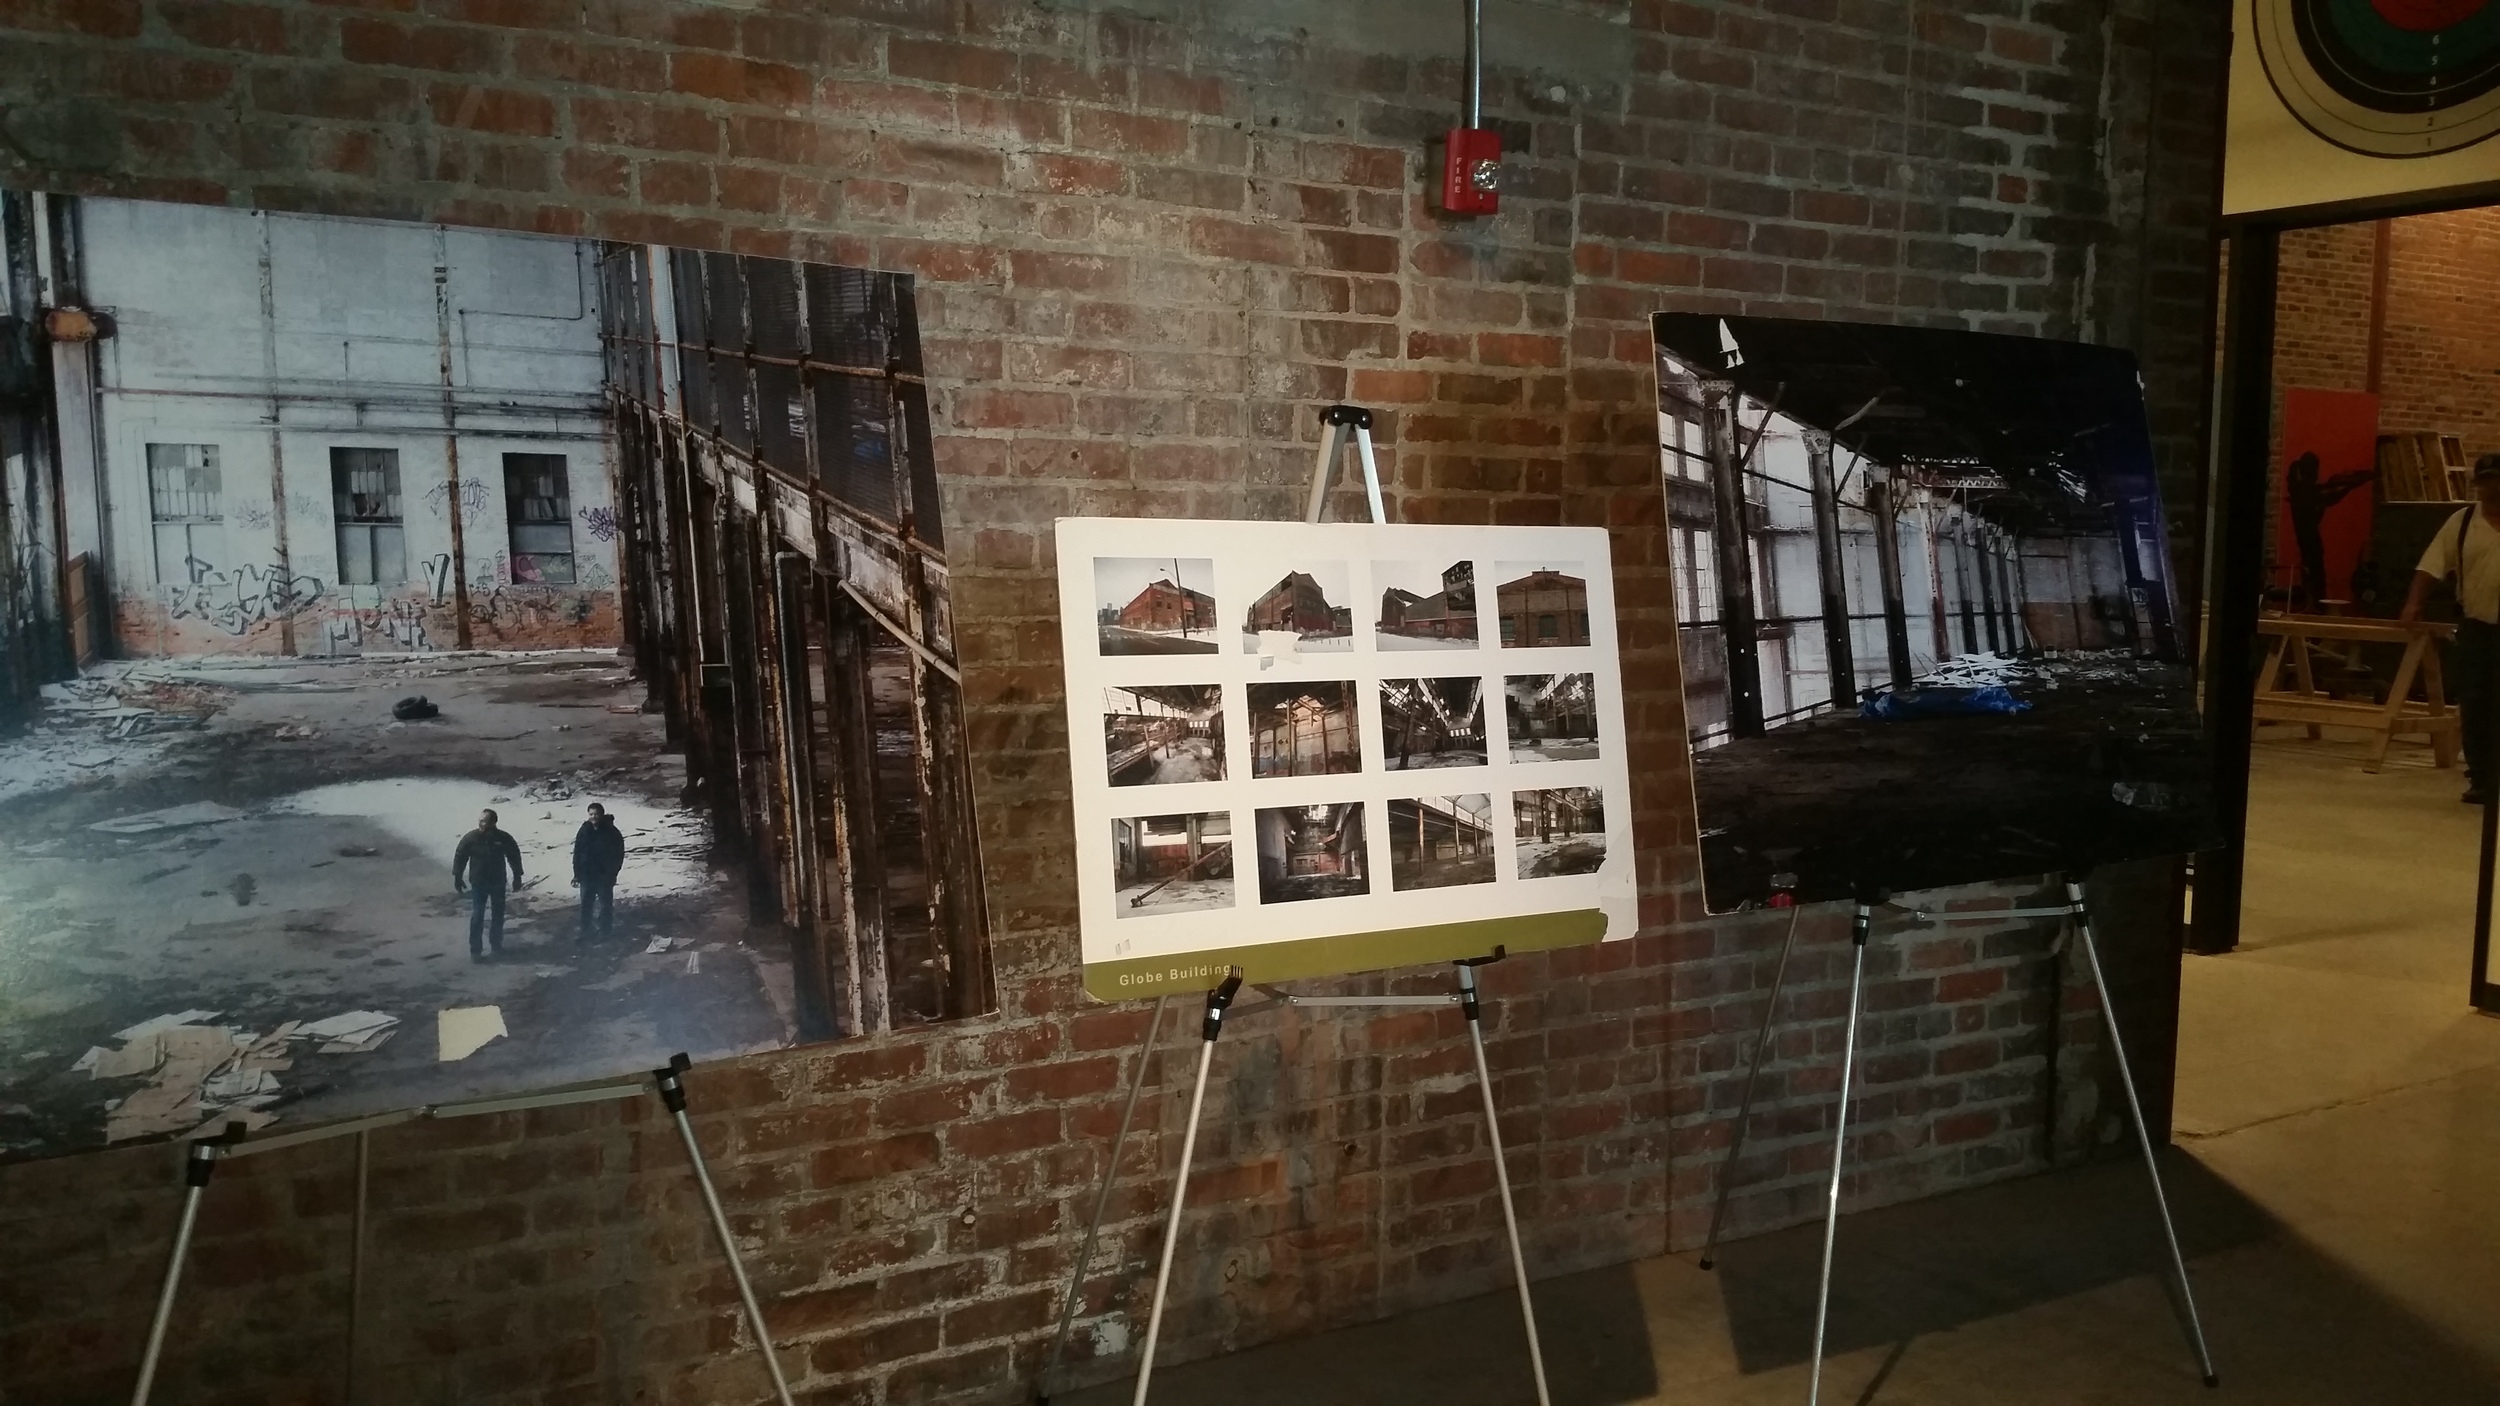 "before" images on display